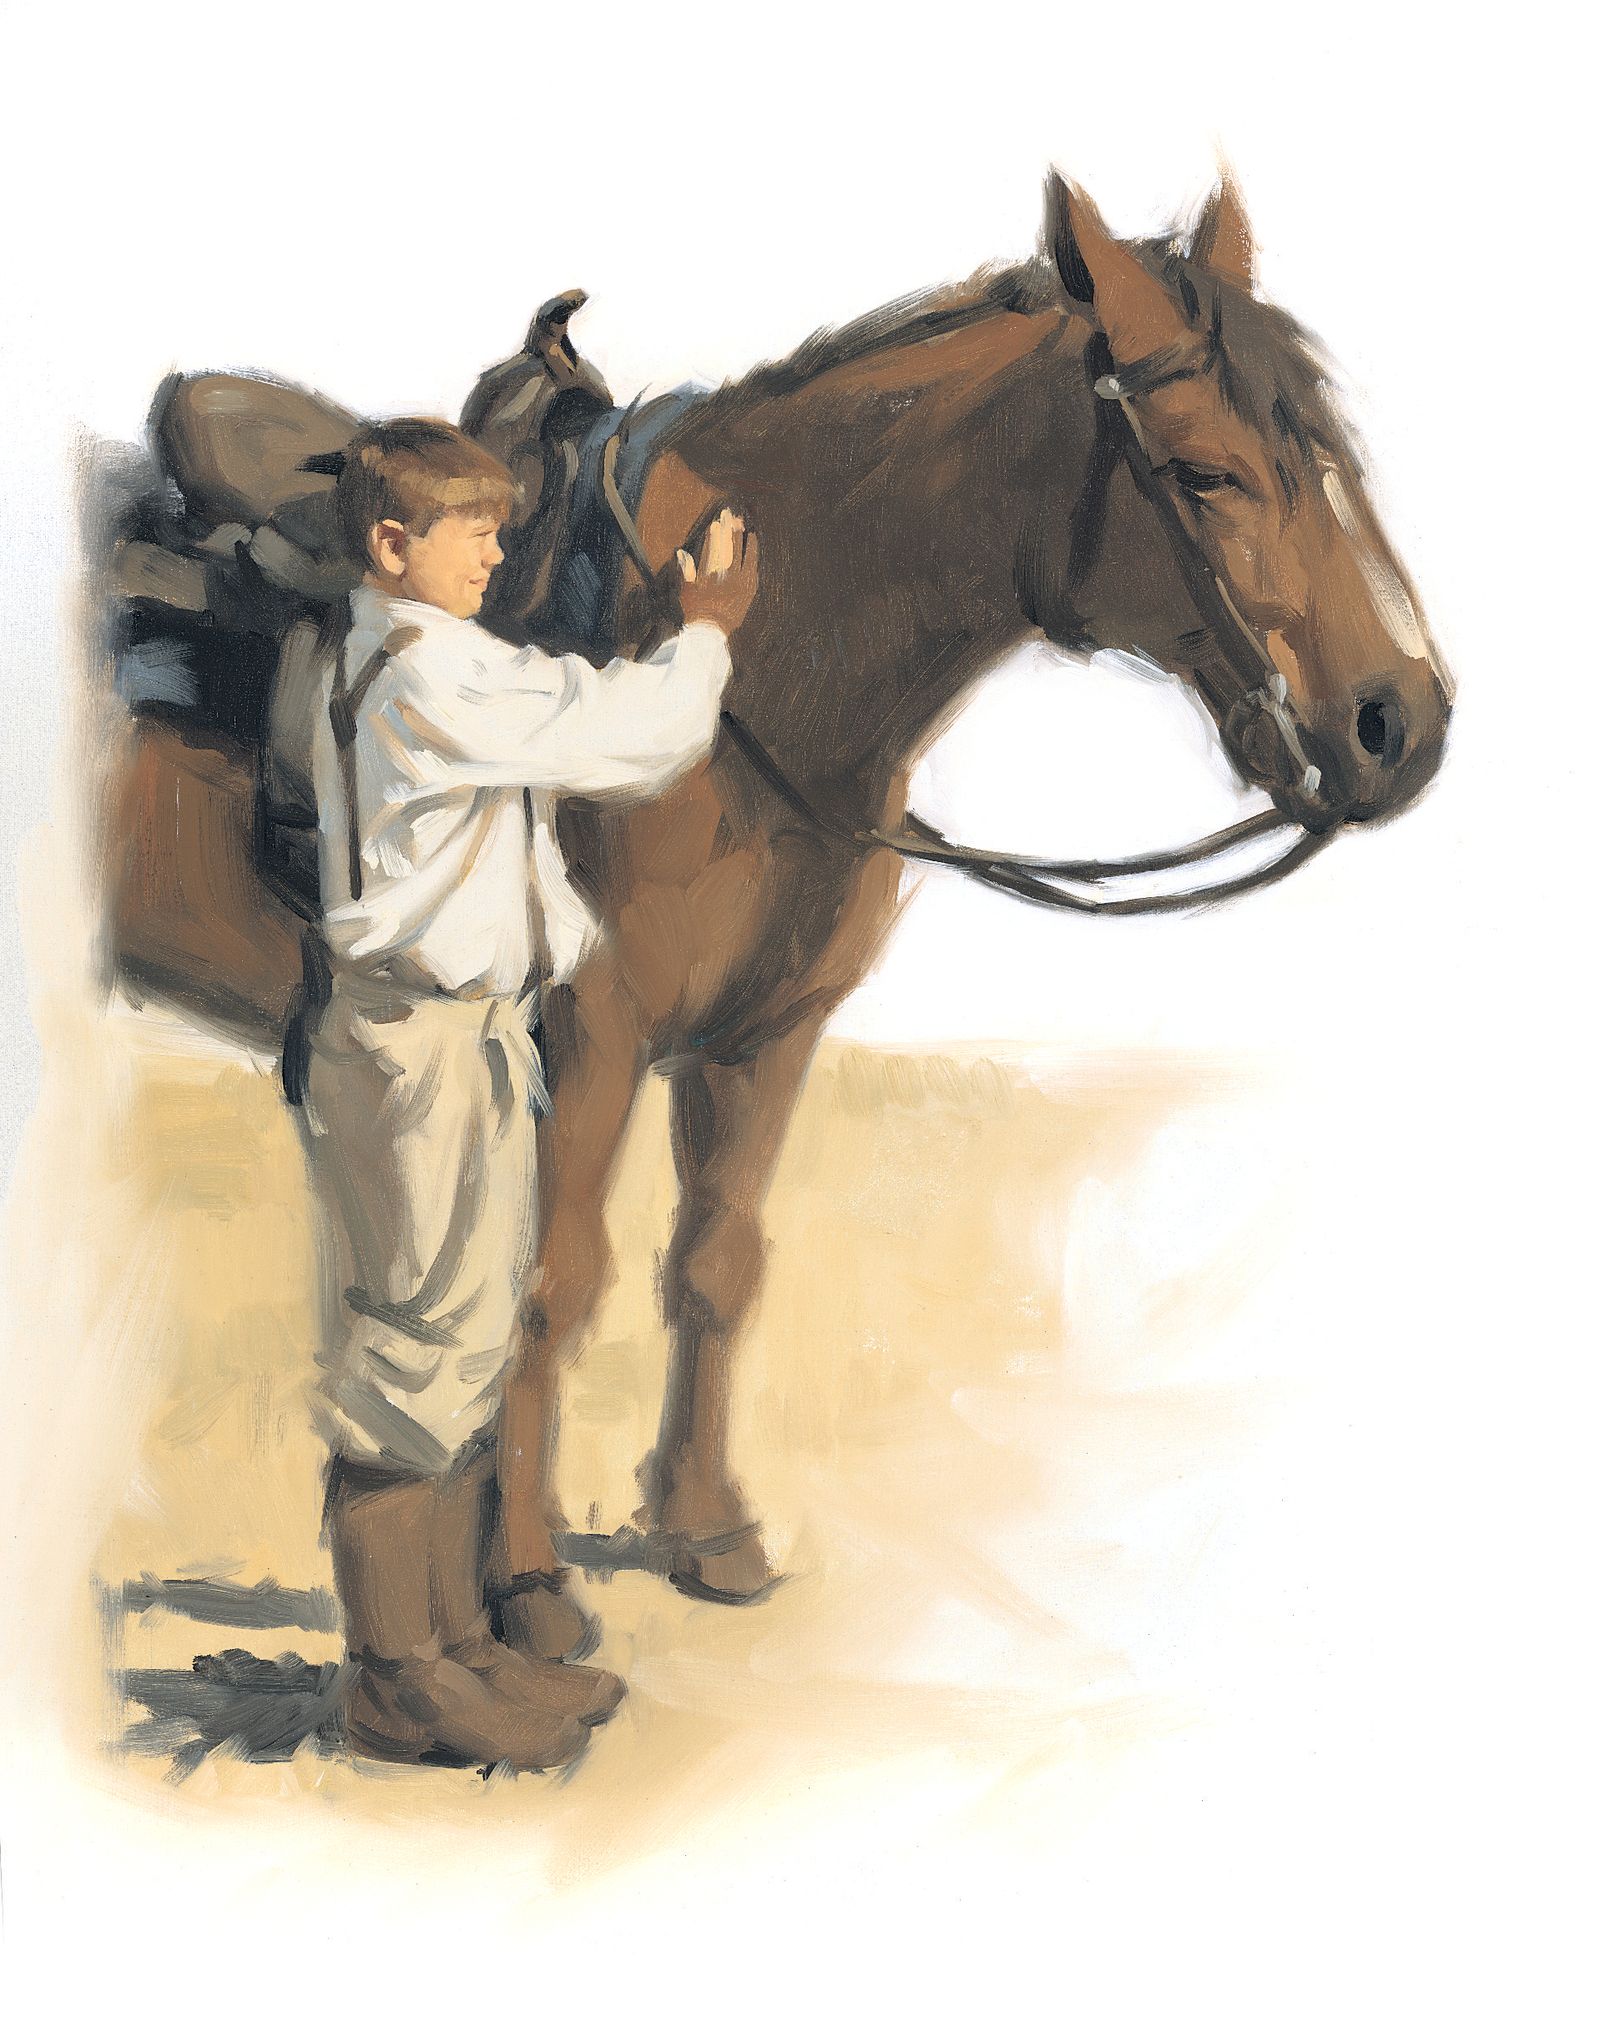 A young boy brushes his horse.